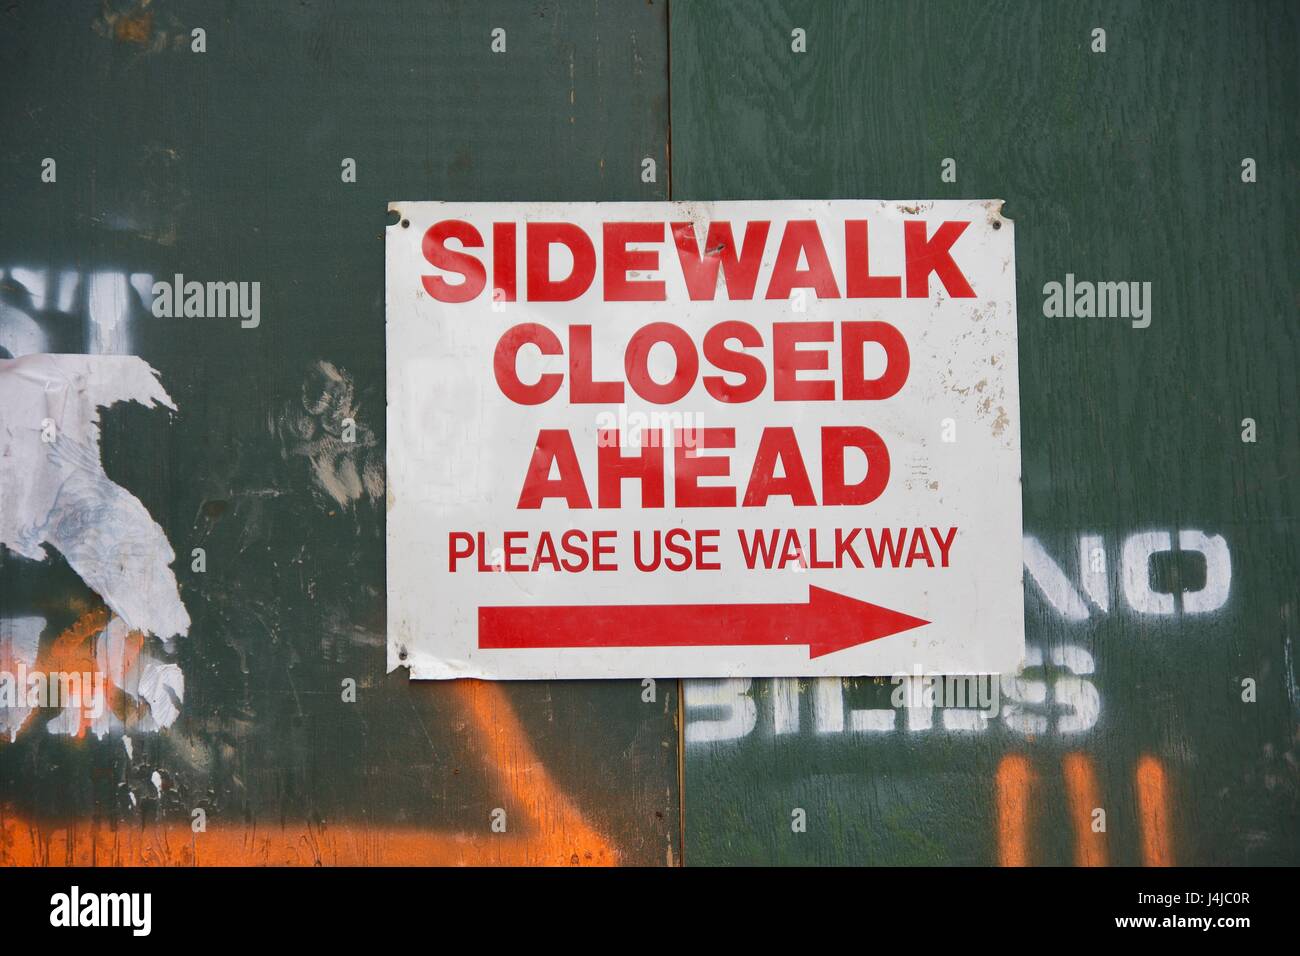 sidewalk closed ahead sign hanging on construction green wall in urban city Stock Photo